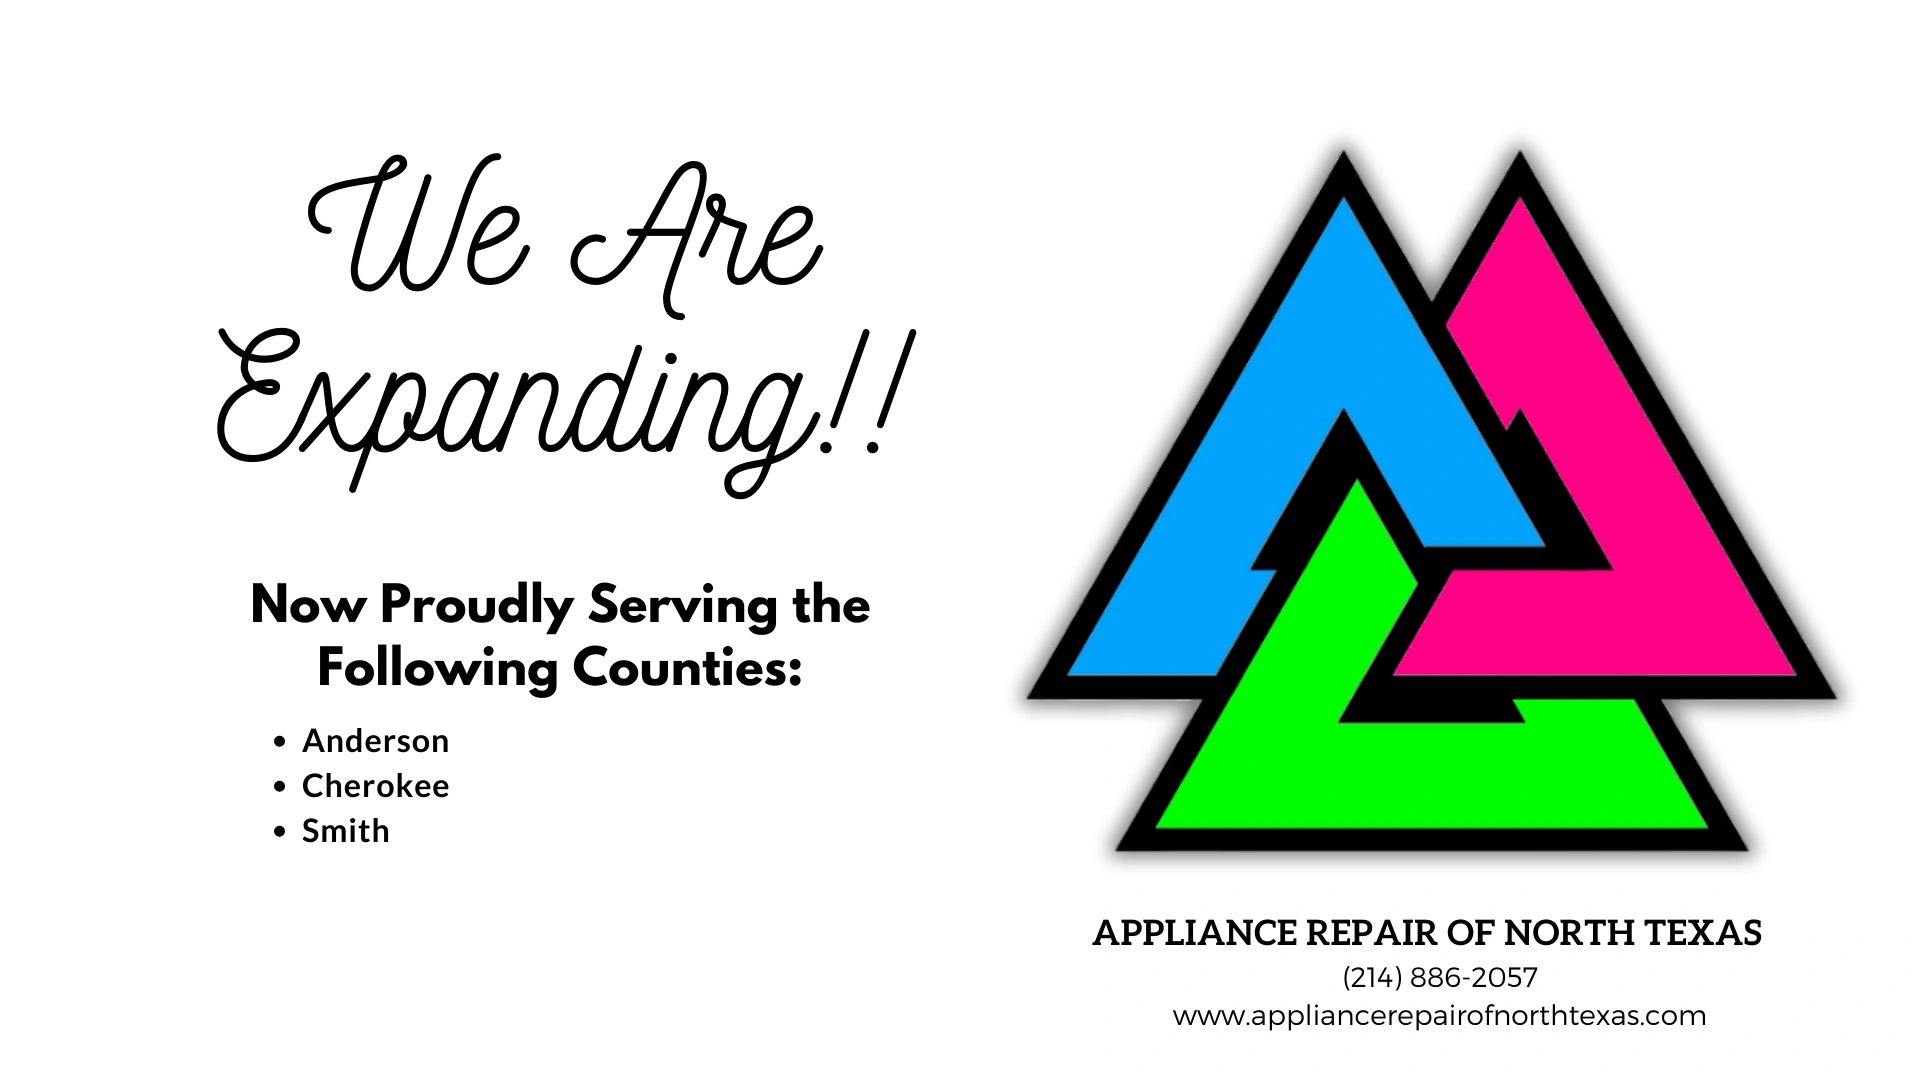 We are expanding to Anderson, Cherokee and Smith County, TX